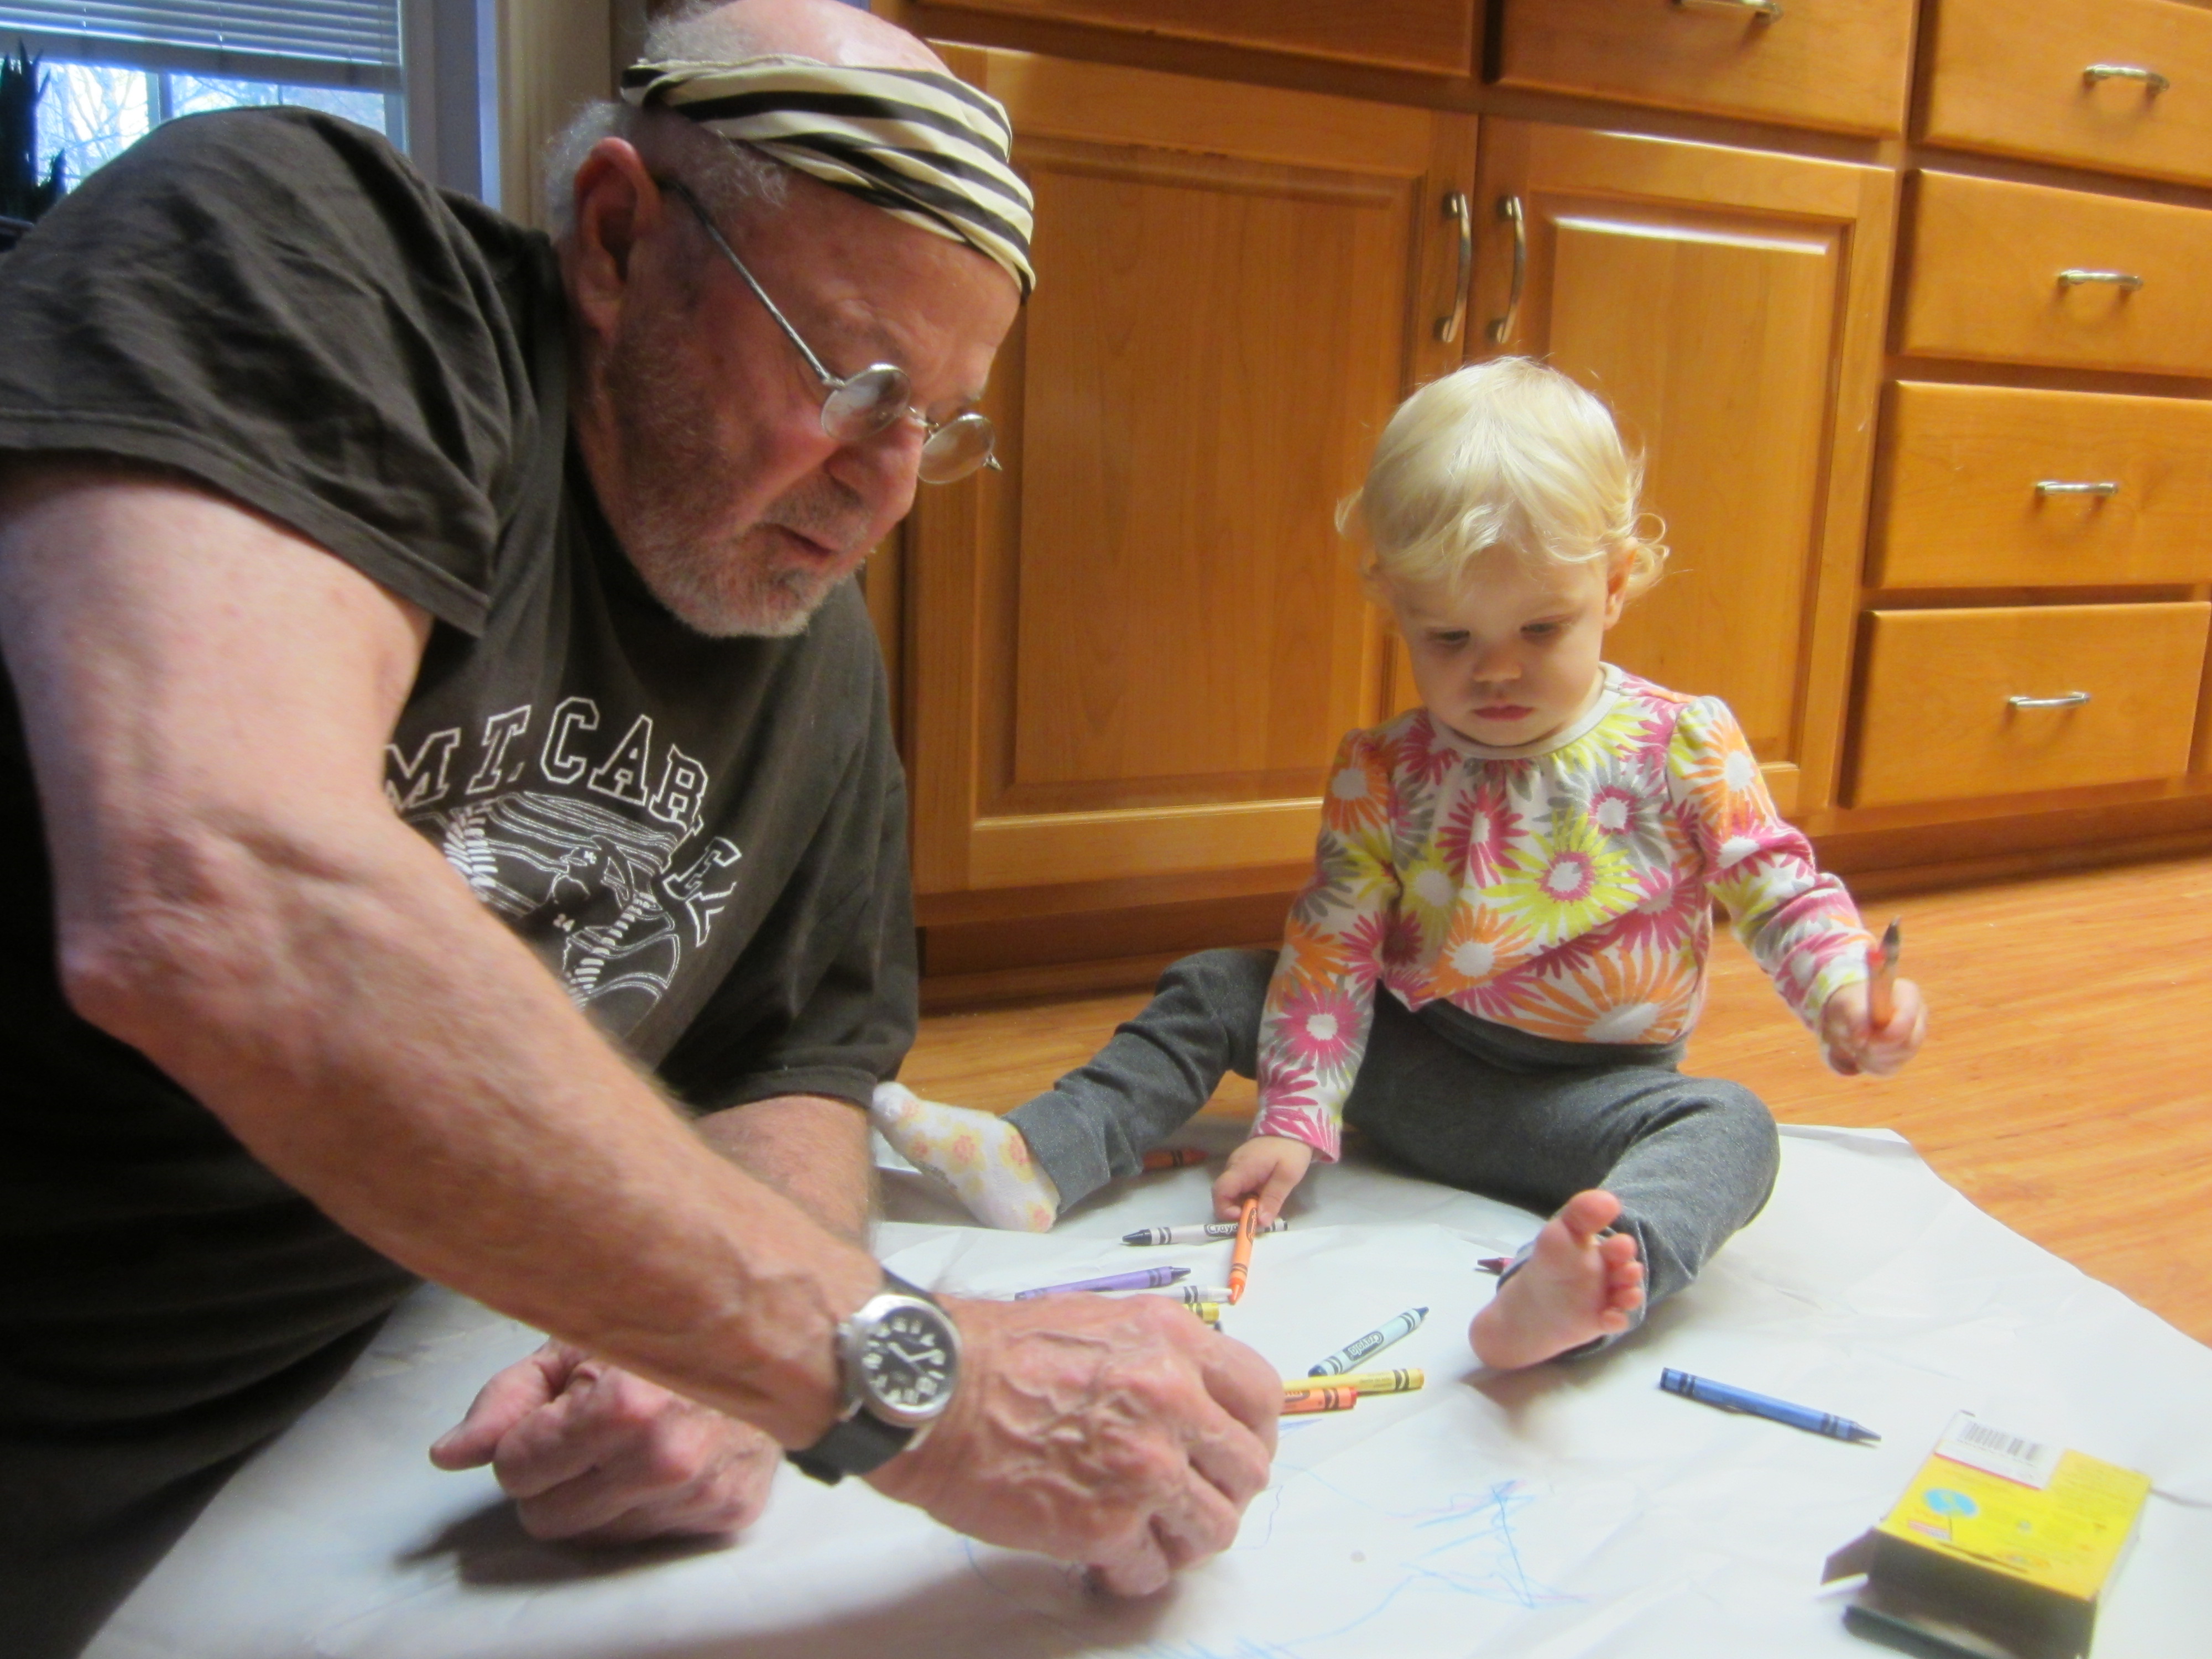 Grandpa Shempy joins Peeper for craft time.